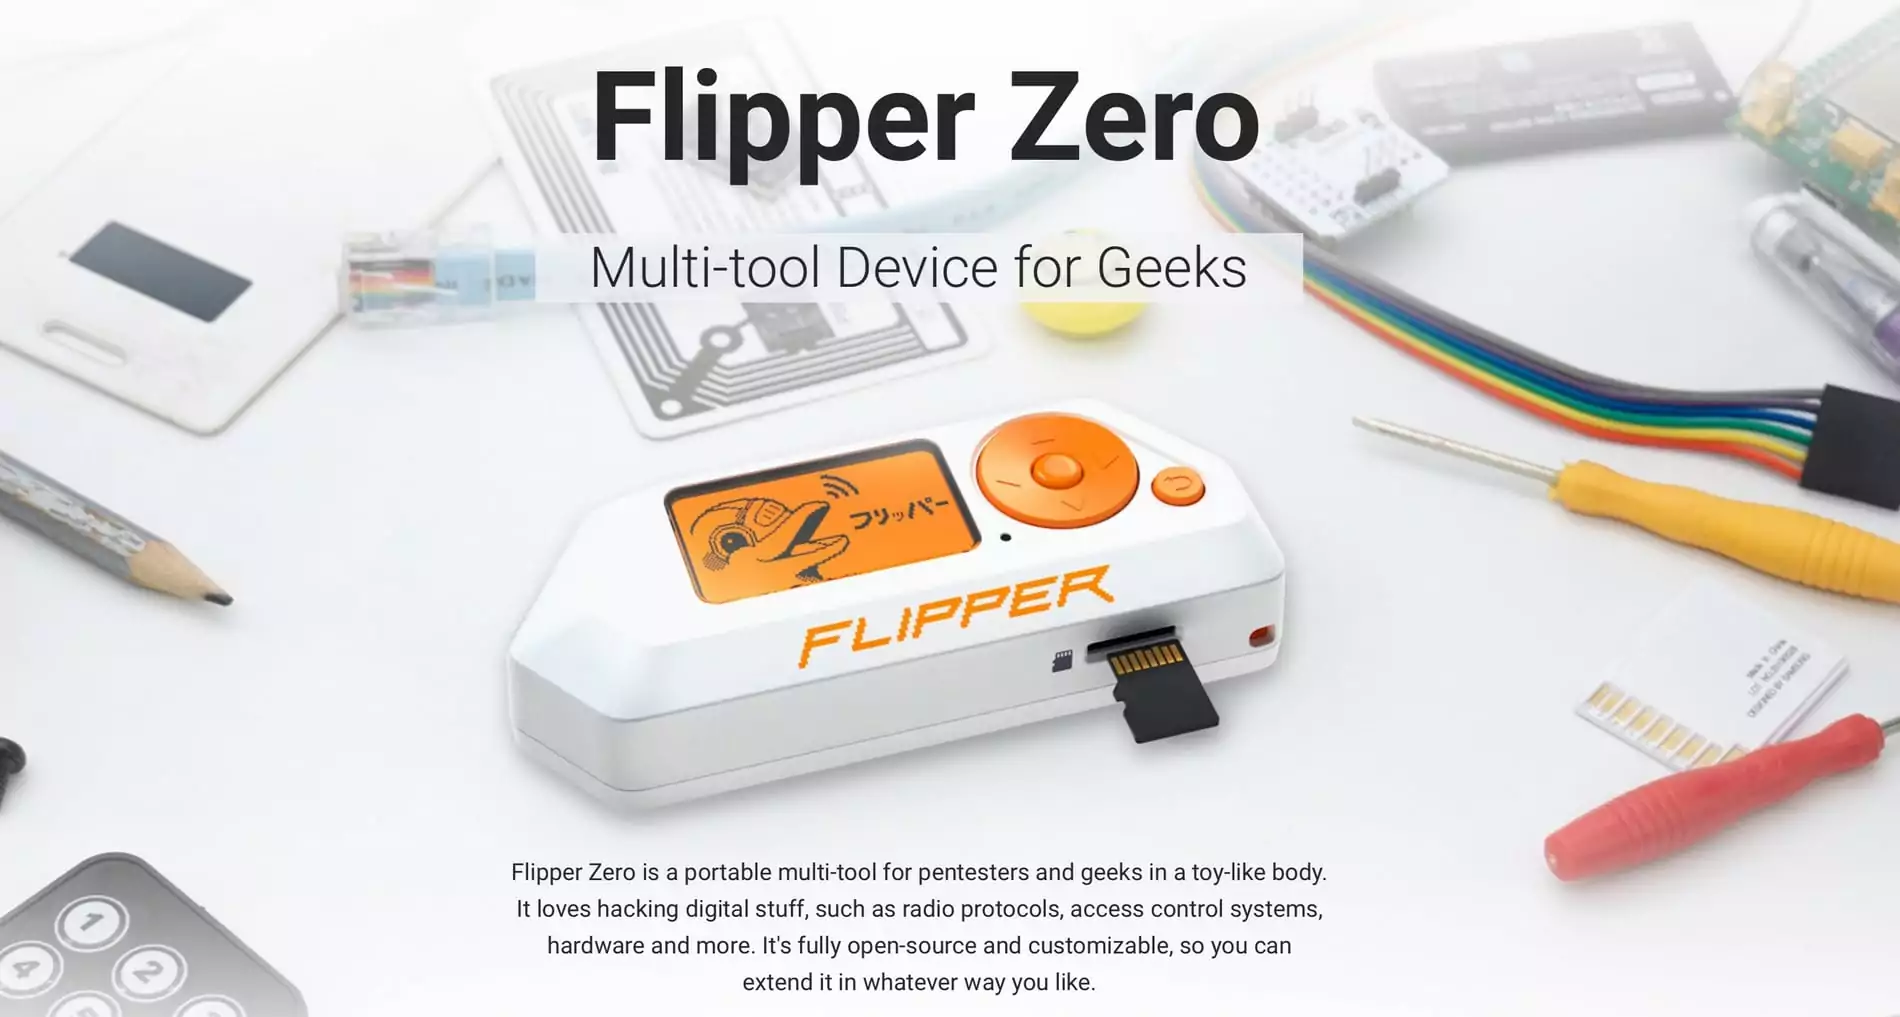 Flipper Zero: An Introduction to Its Capabilities and Potential